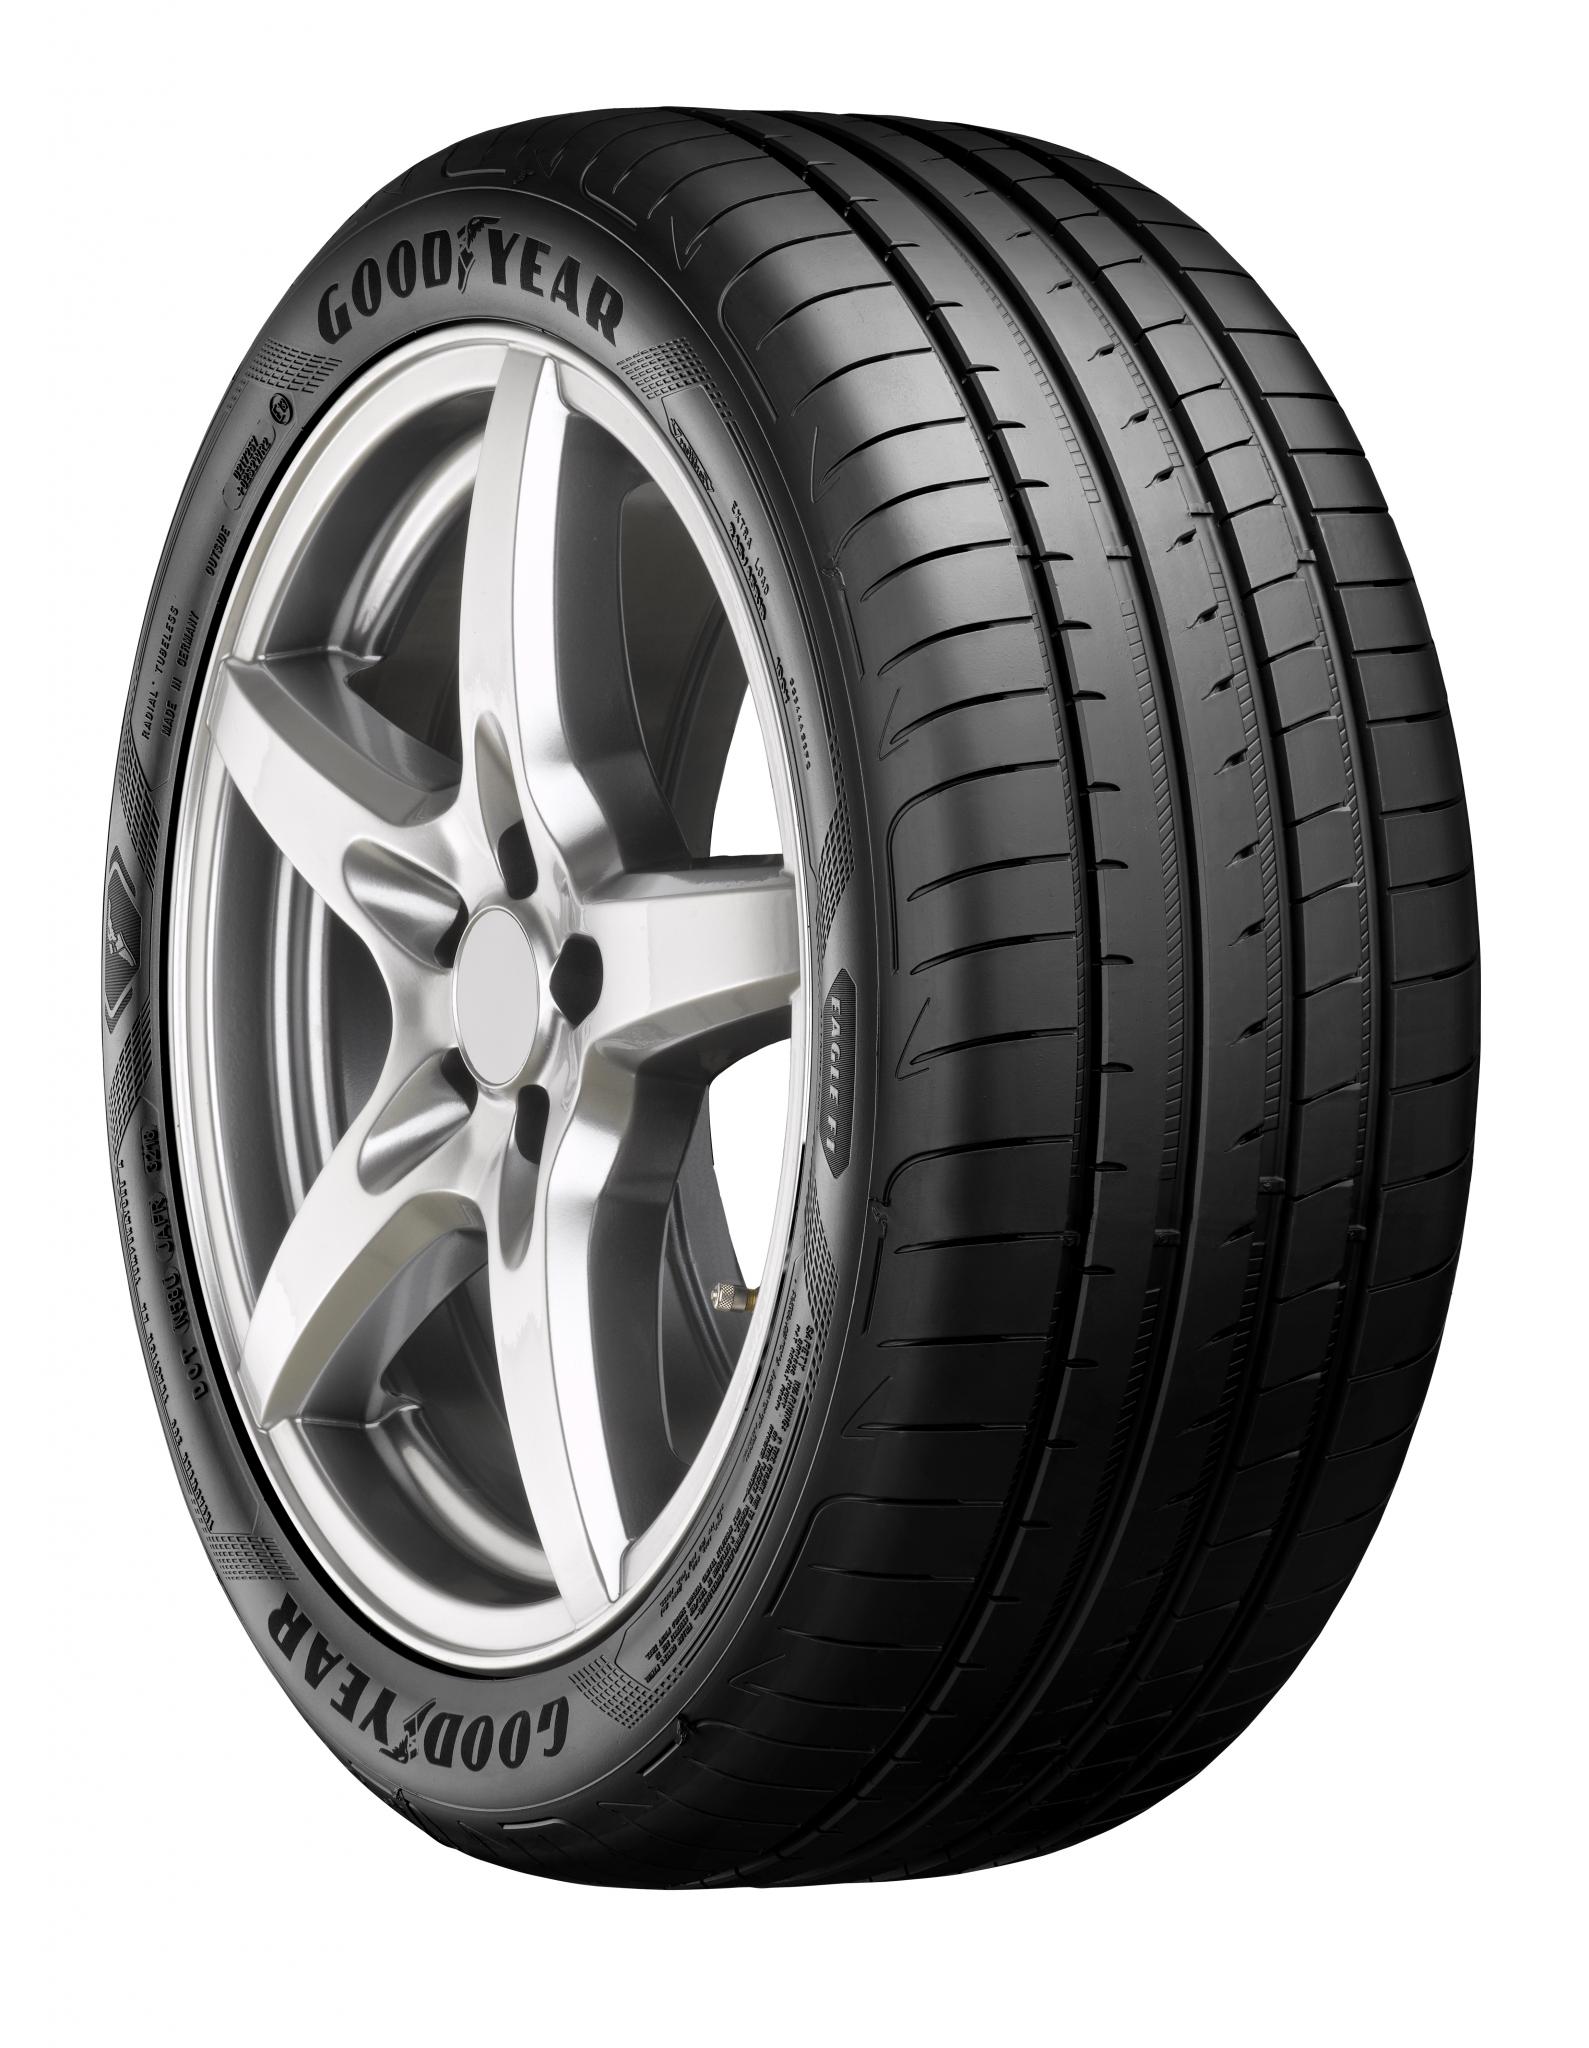 www.tyrereviews.co.uk